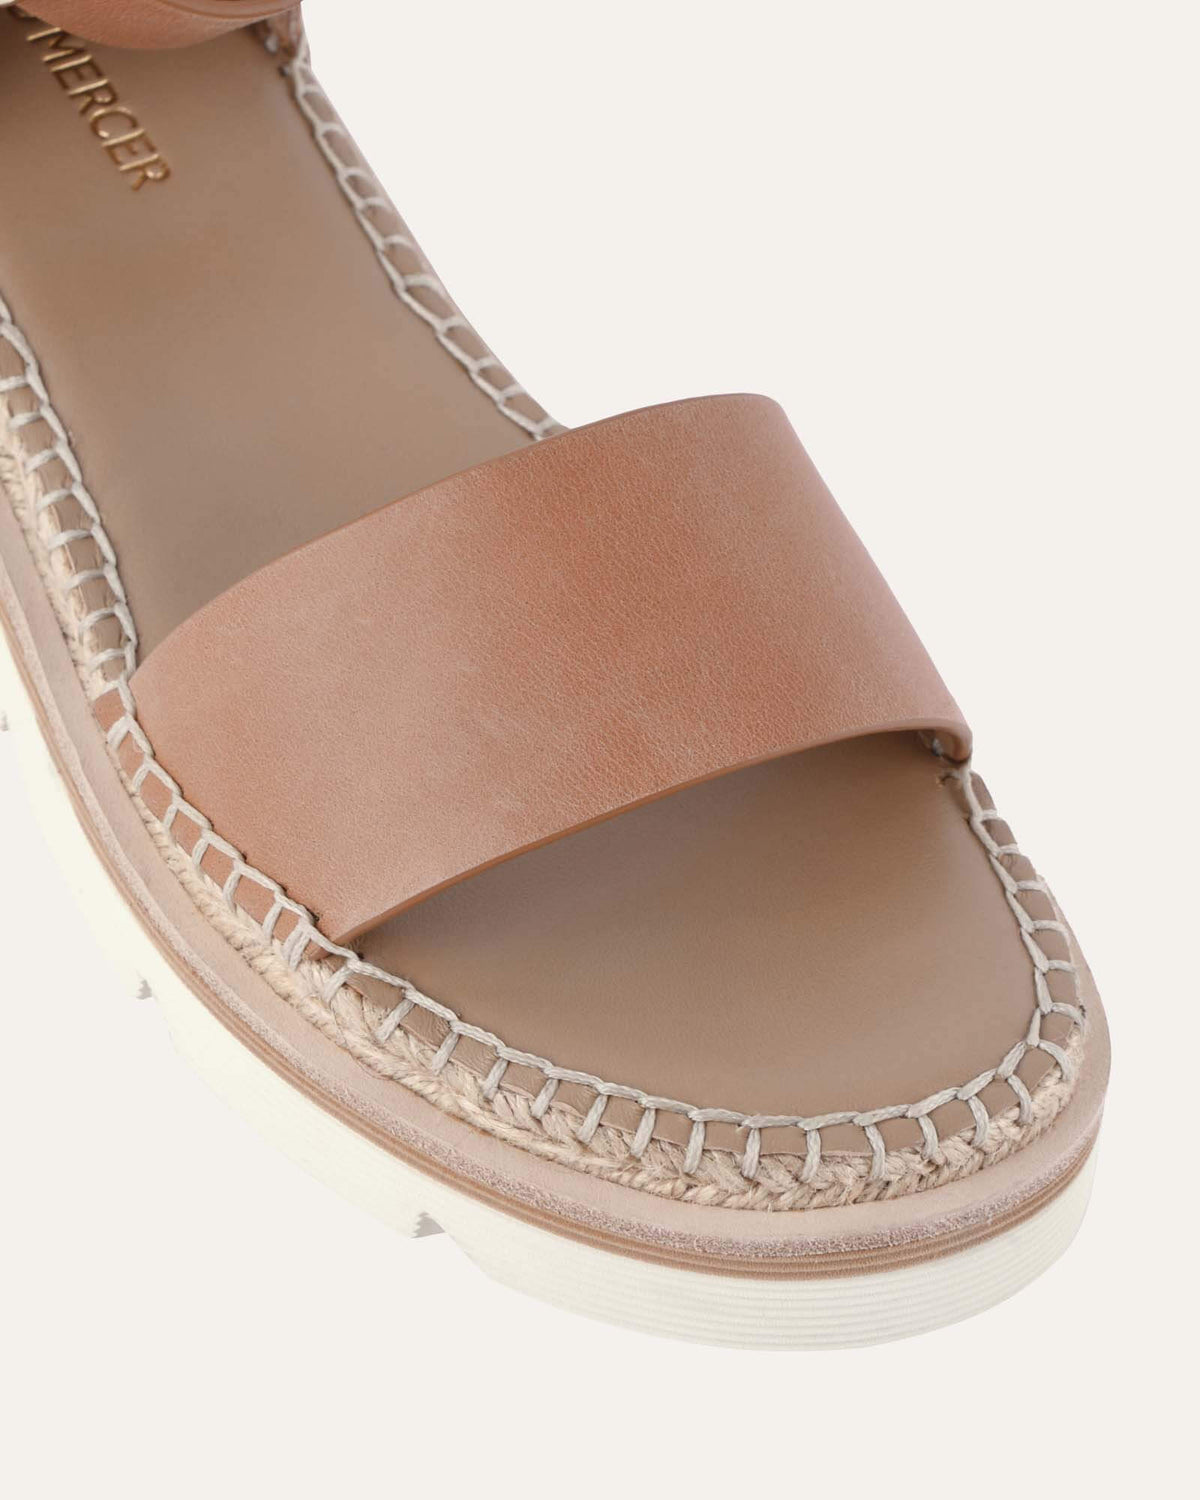 IVY FLAT SANDALS TAN LEATHER